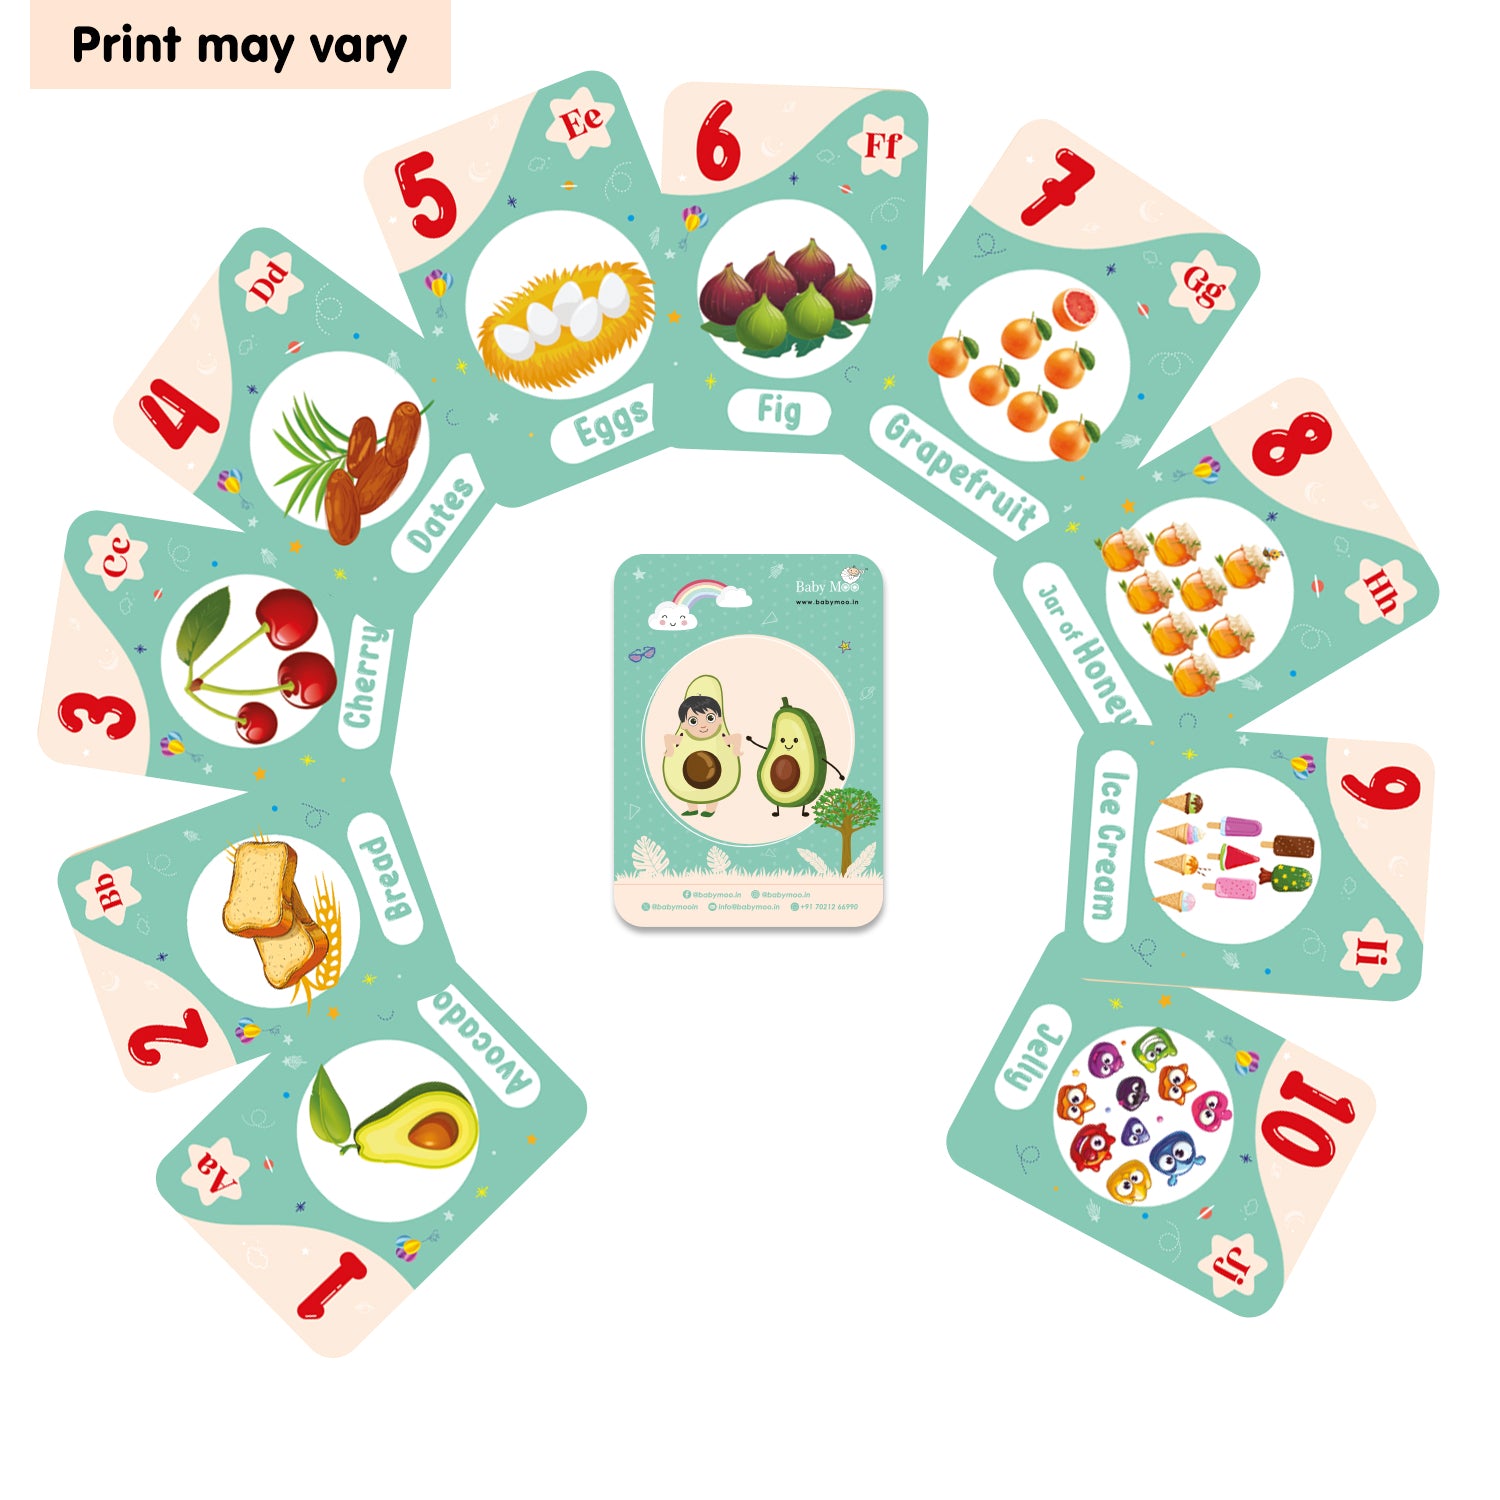 Baby Moo Fun With Food Numbers & Alphabets Montessori Set Of 10 Flash Cards - Green, Peach